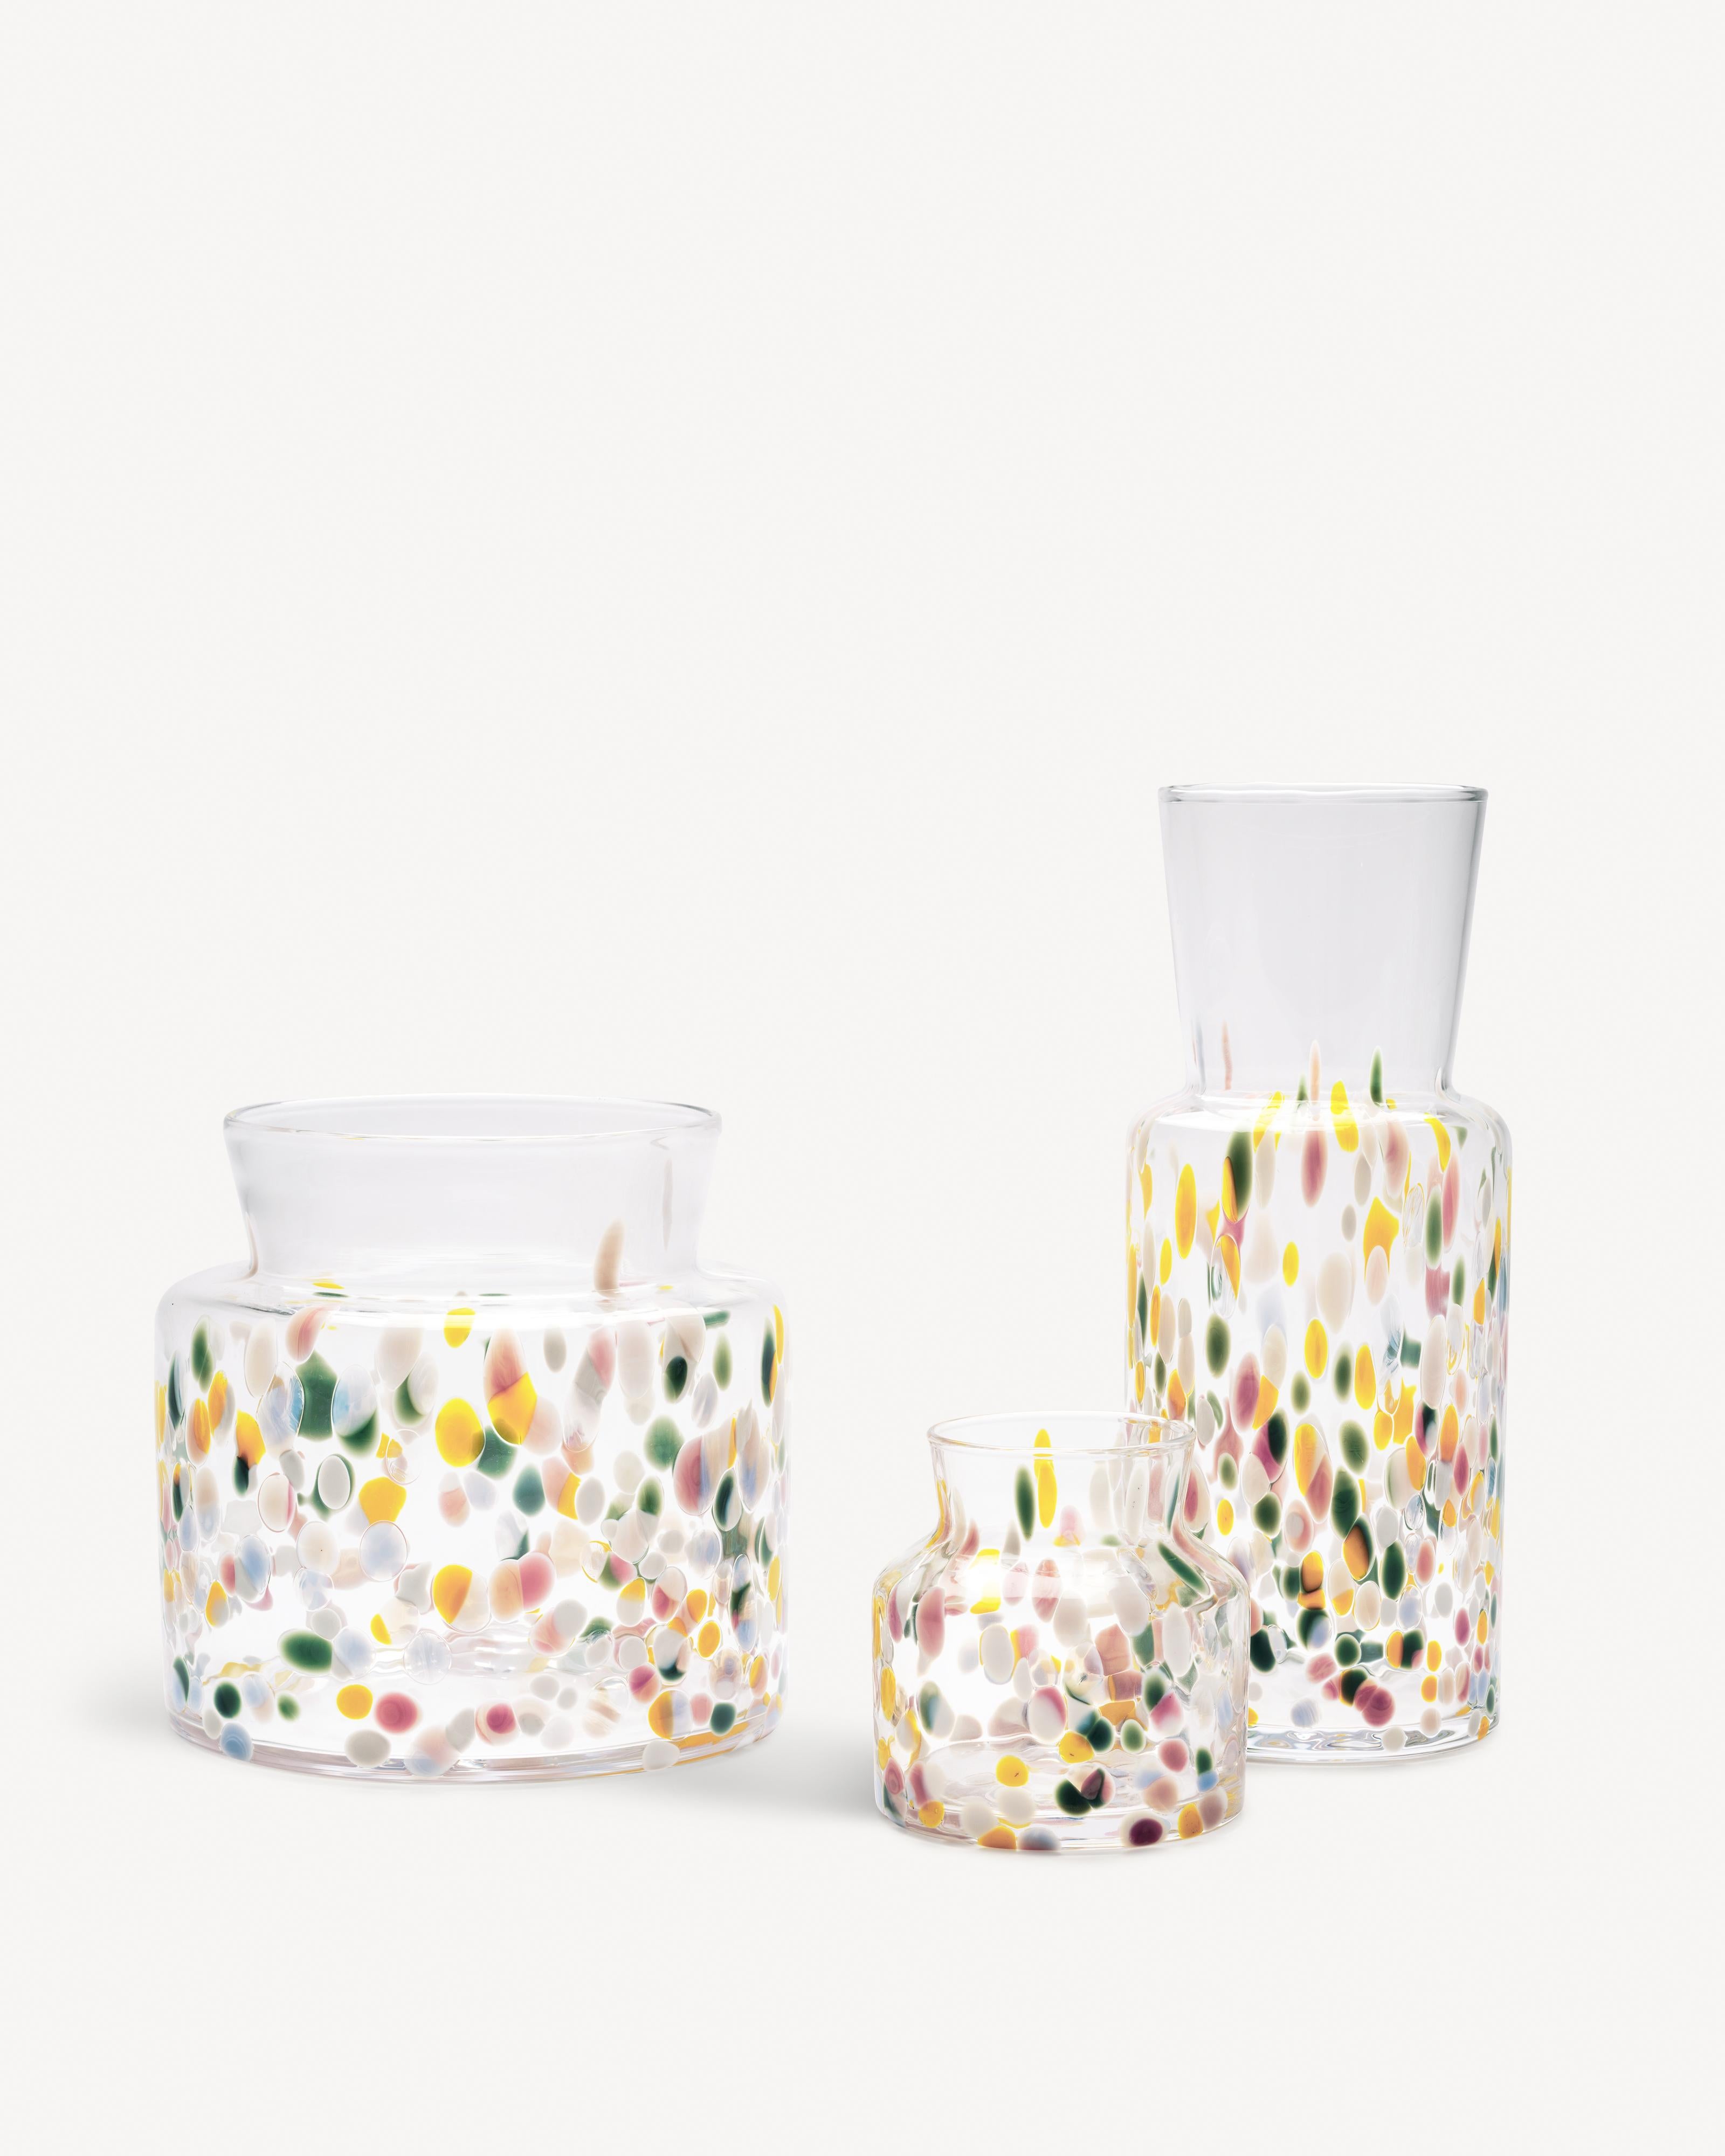 Meadow Spring is as colorful and lively as a flower meadow that comes to life during the first sunny days of spring. During the production the vases are rolled in crushed pieces of colored glass, which makes each vase unique. The vase from Kosta